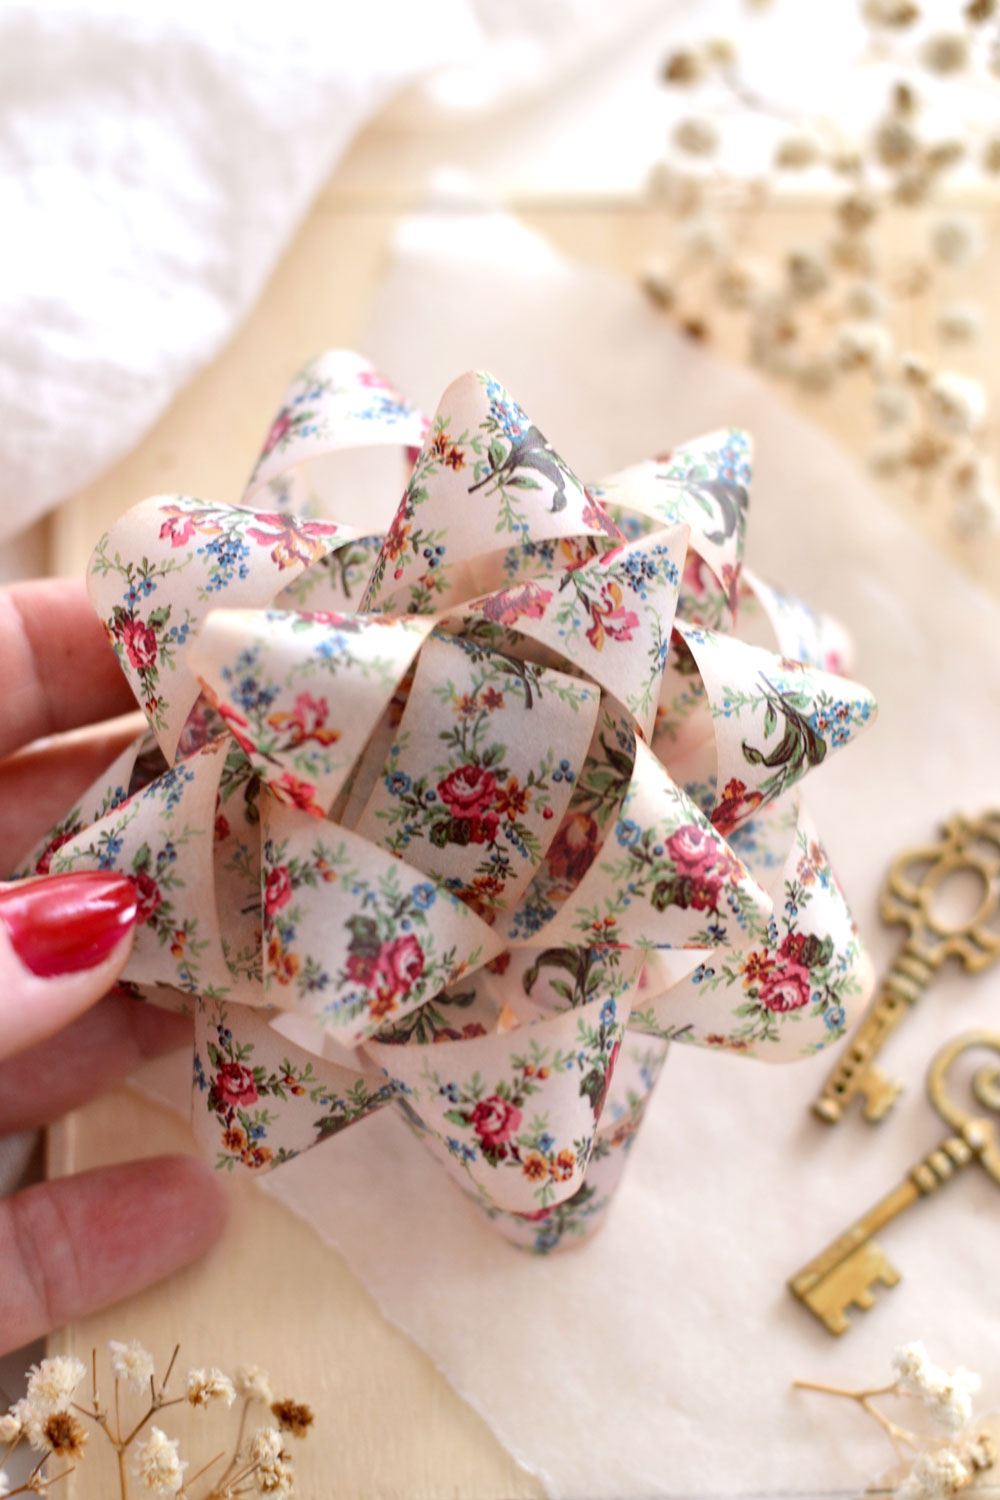 The finished floral bow